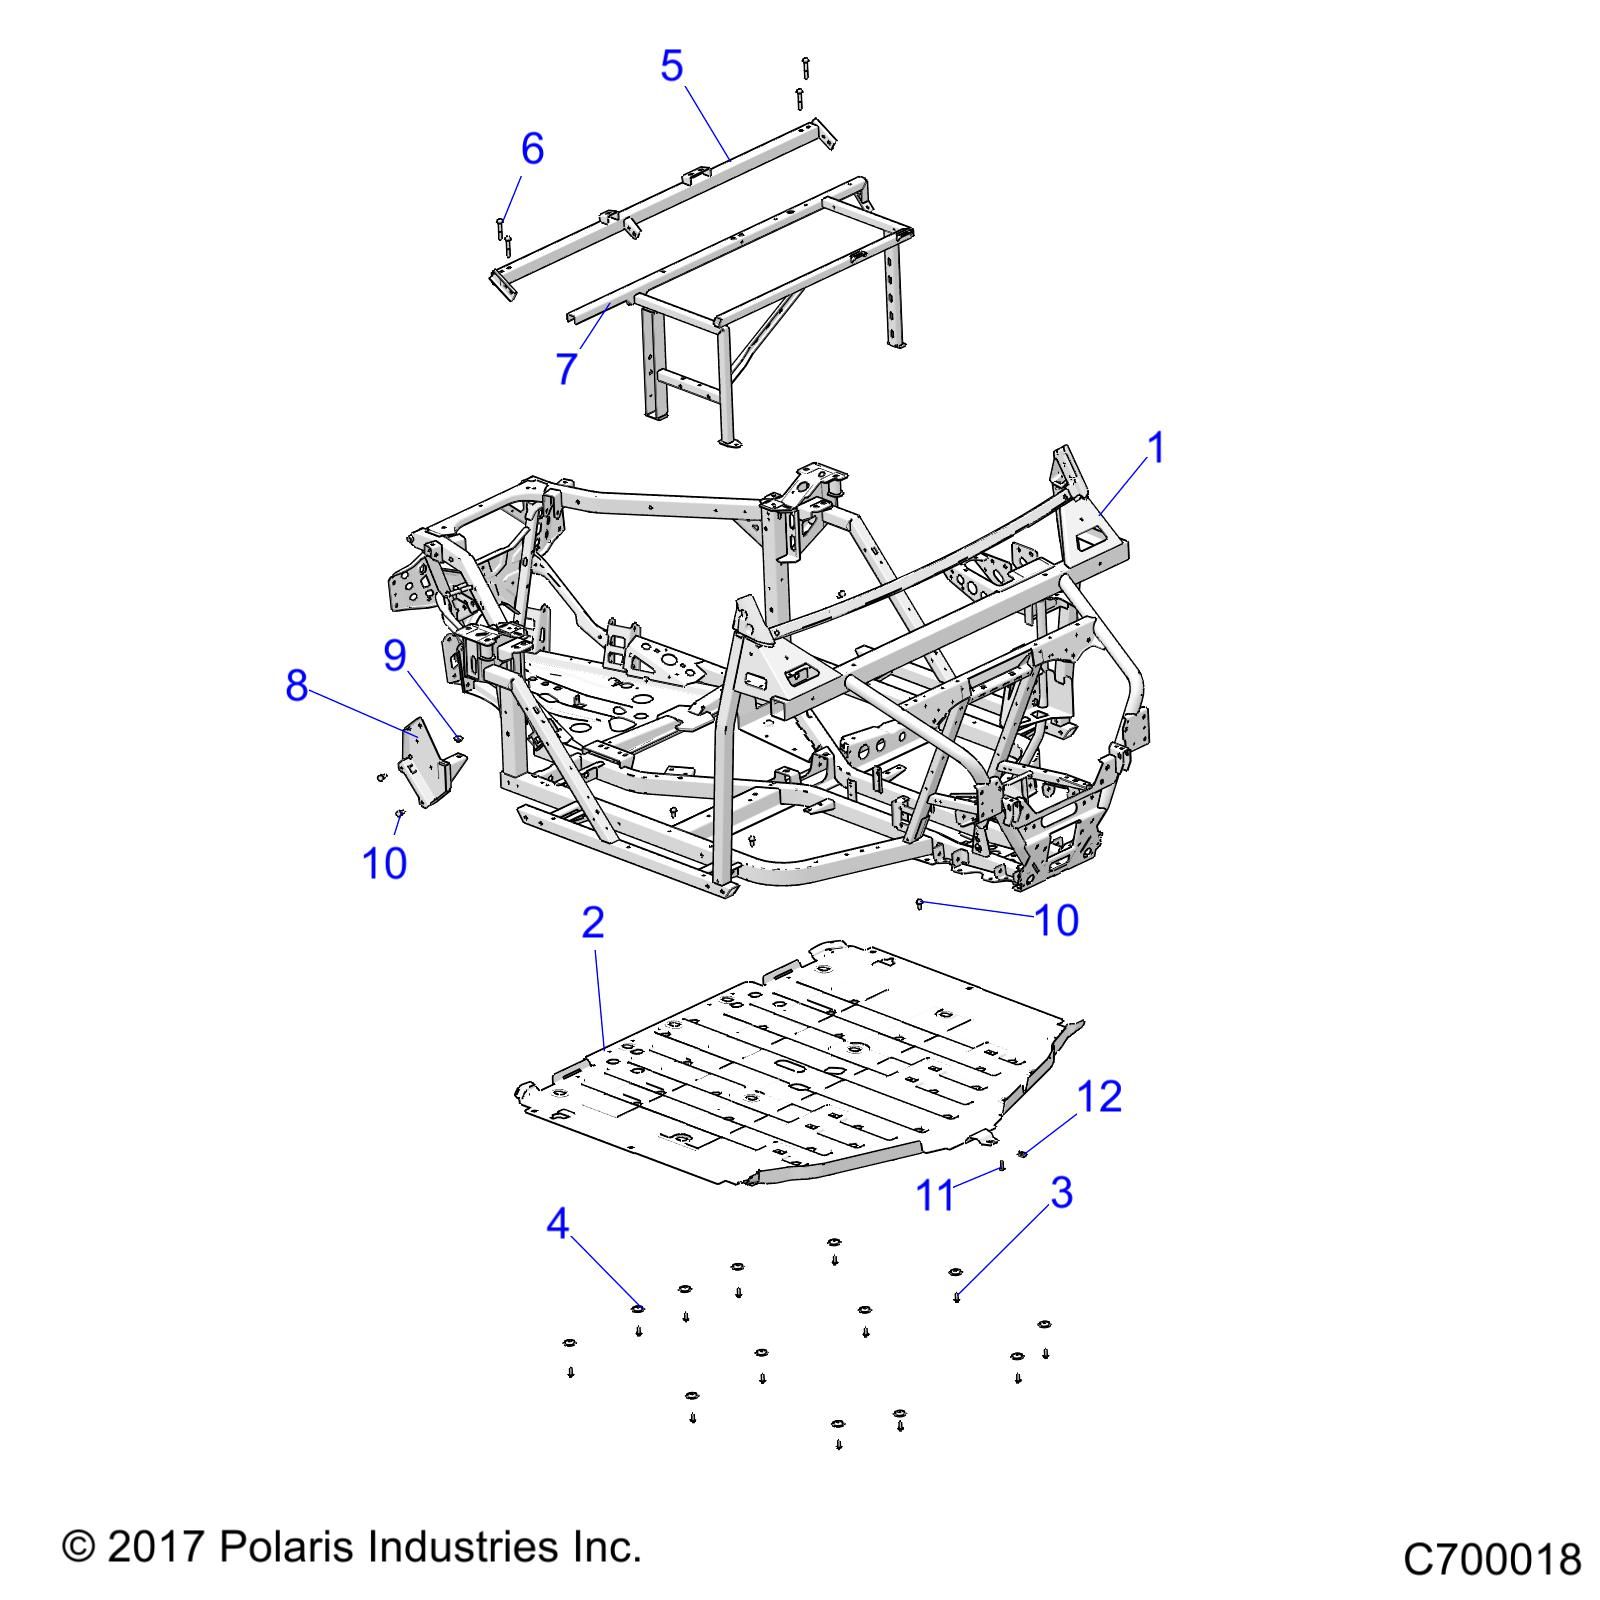 CHASSIS MAIN FRAME AND SKID PLATES POUR RANGER XP 1000 NSTR ULTIMATE TRAIL BOSS R02 2023